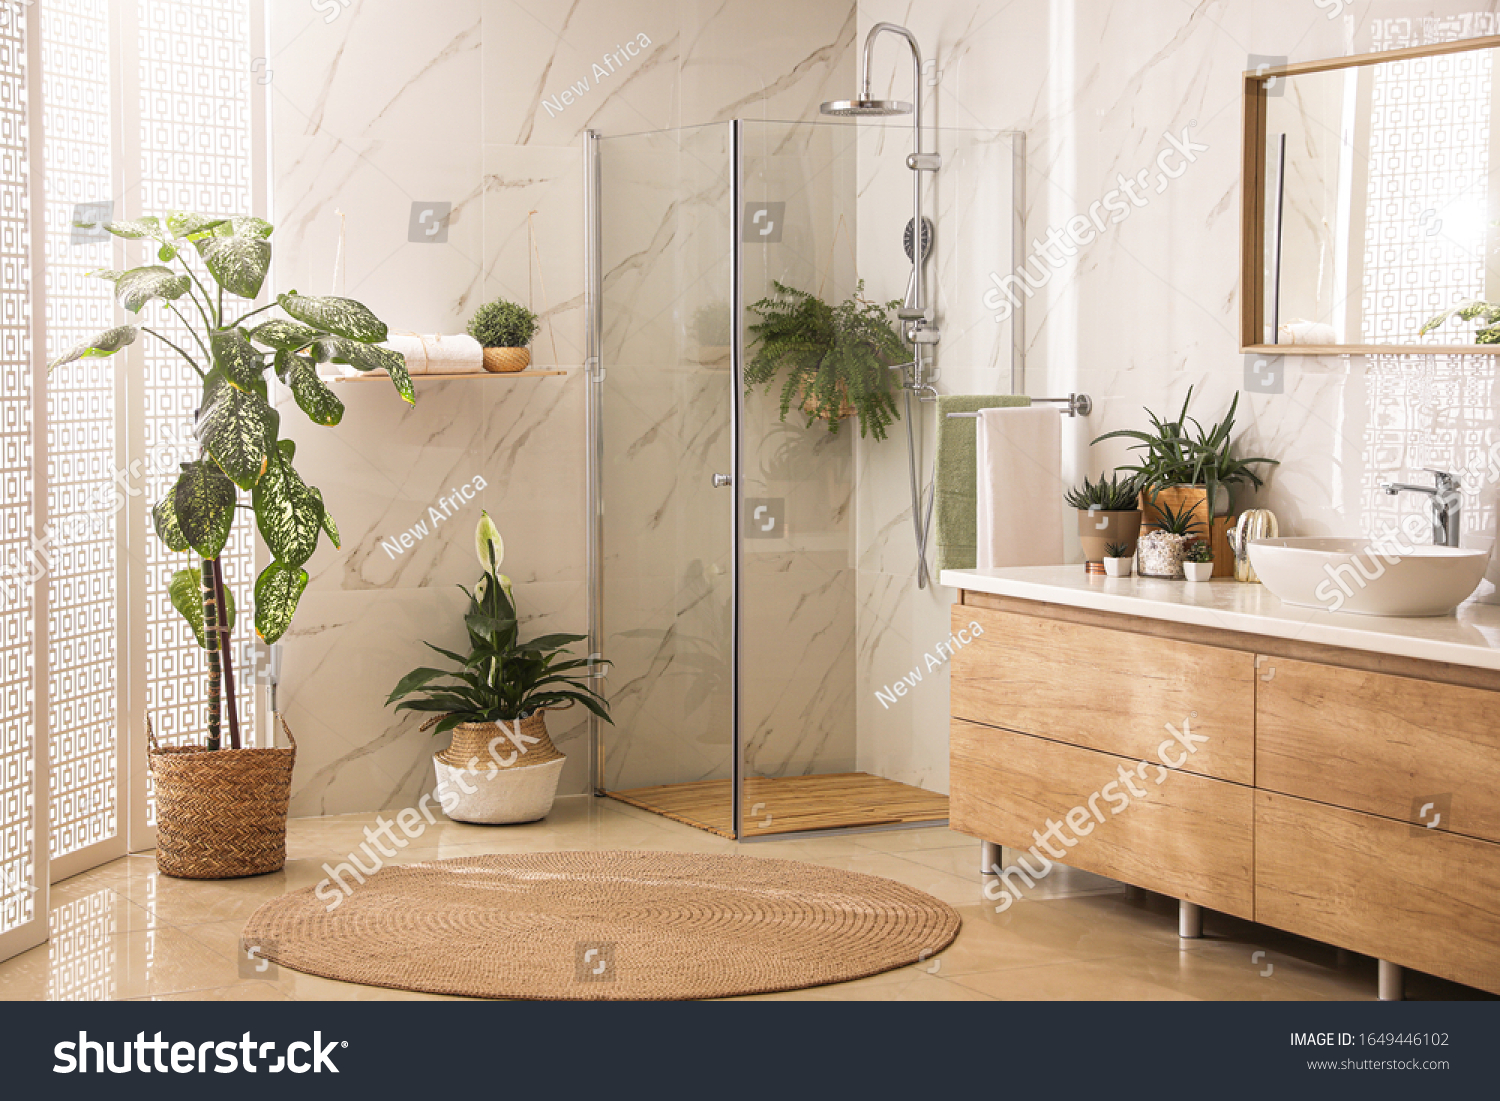 Stylish bathroom interior with countertop, shower stall and houseplants. Design idea #1649446102